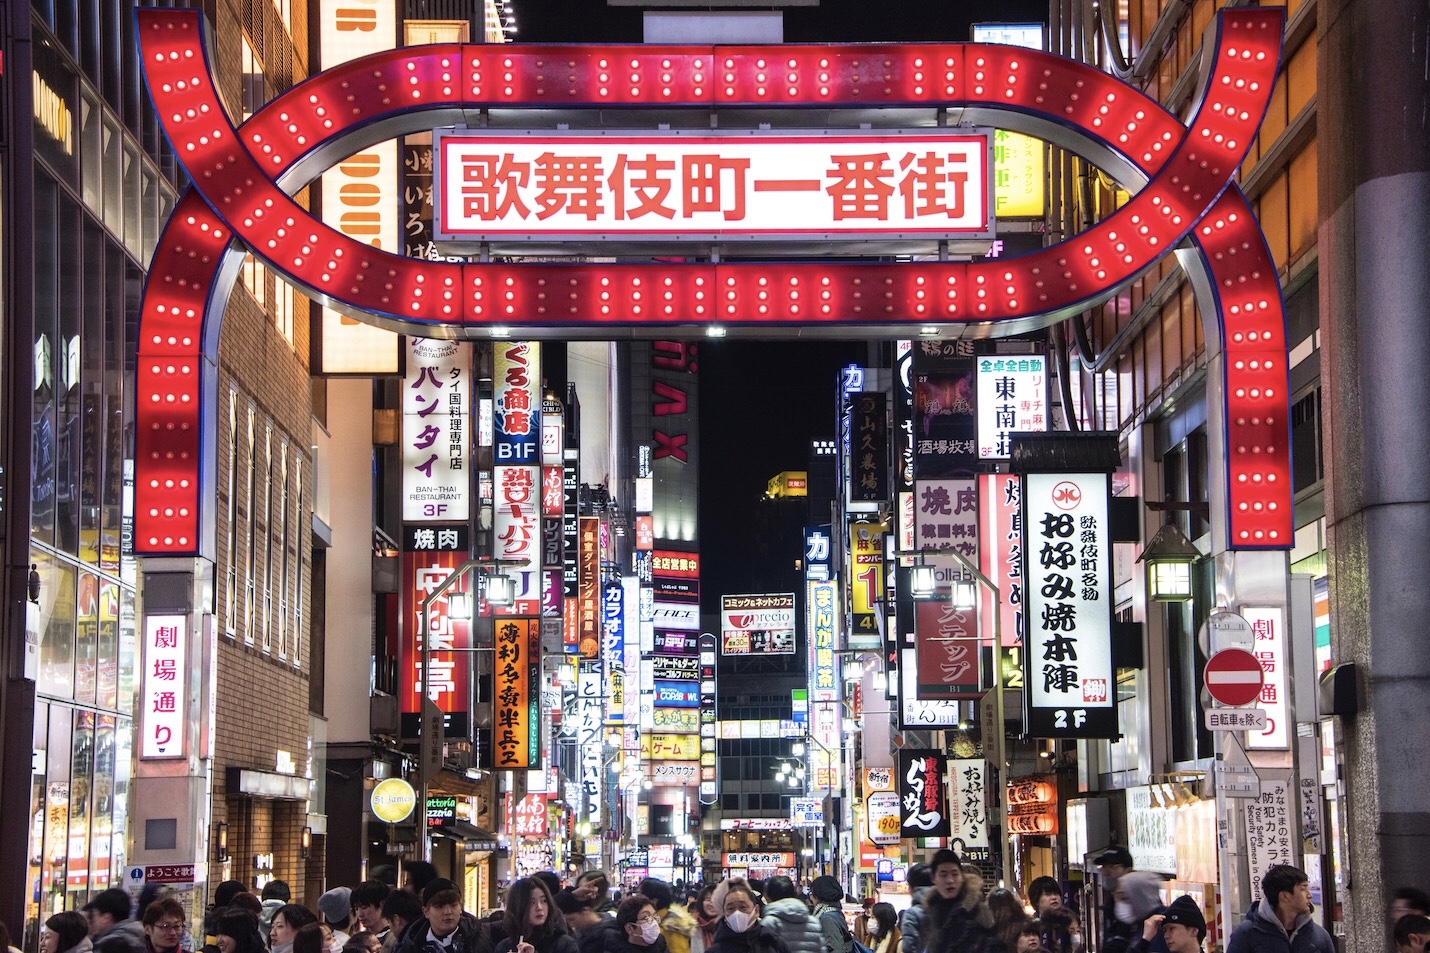 Japan's Government Sustains Online Gambling Restrictions